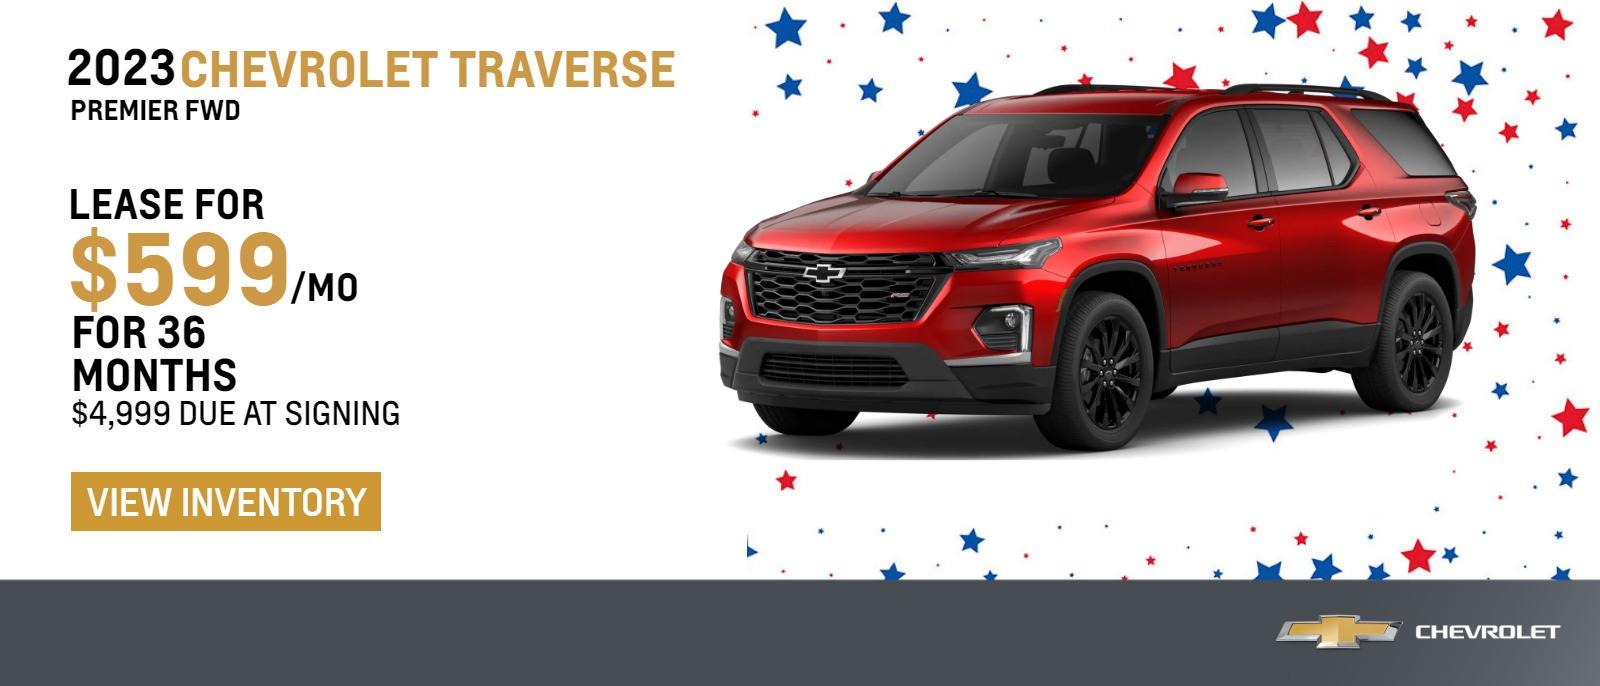 2023 Chevrolet Traverse Premier FWD
$599 Month Lease | 36 Months | $4999 Due at signing